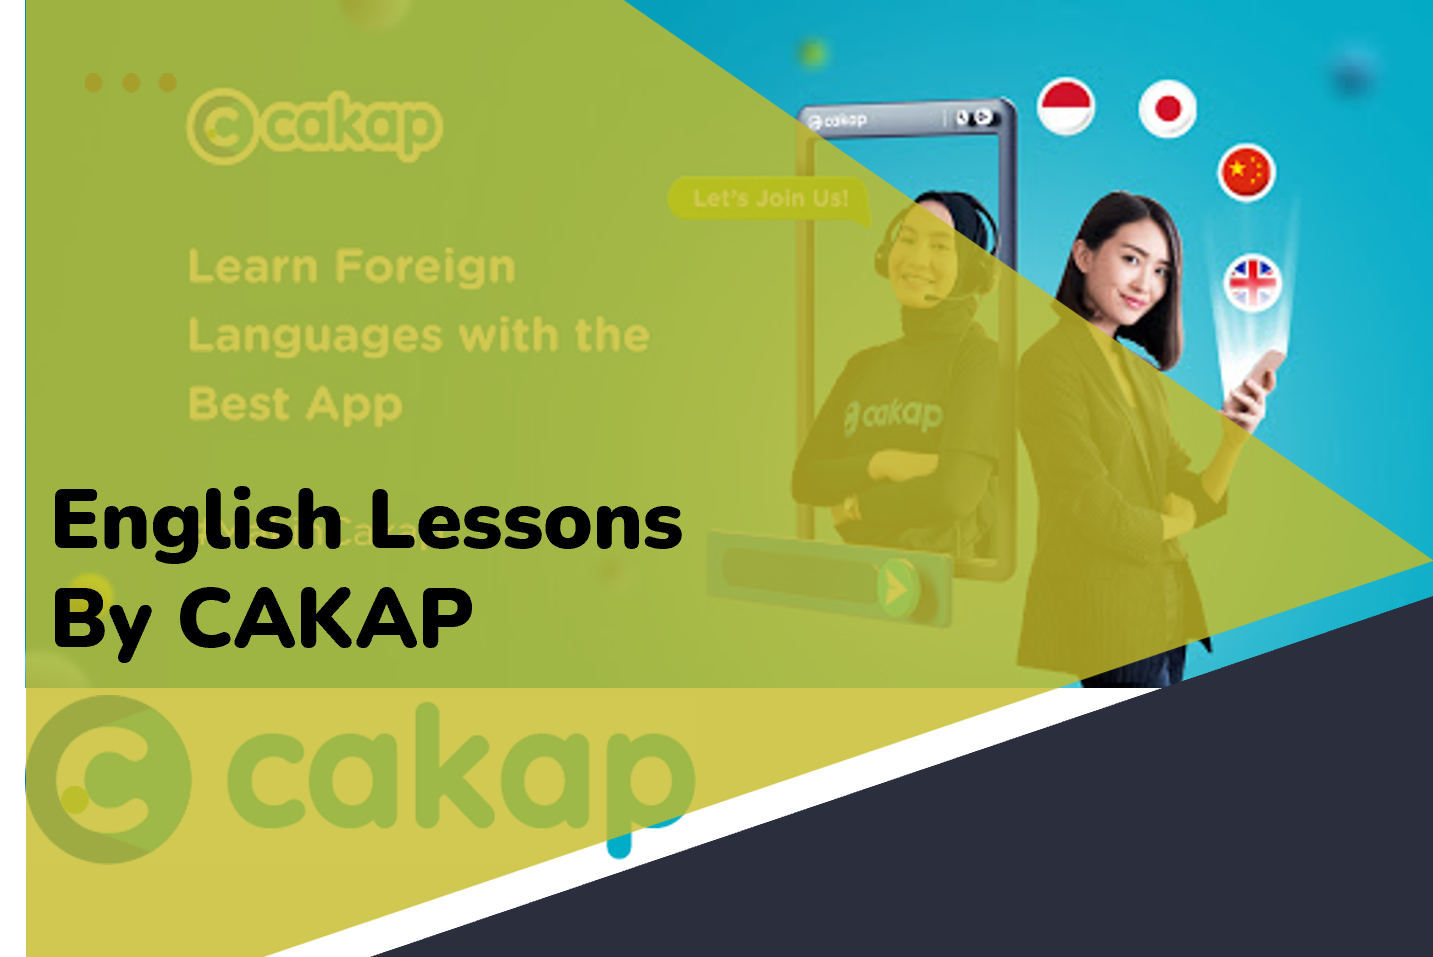 English Lessons by CAKAP